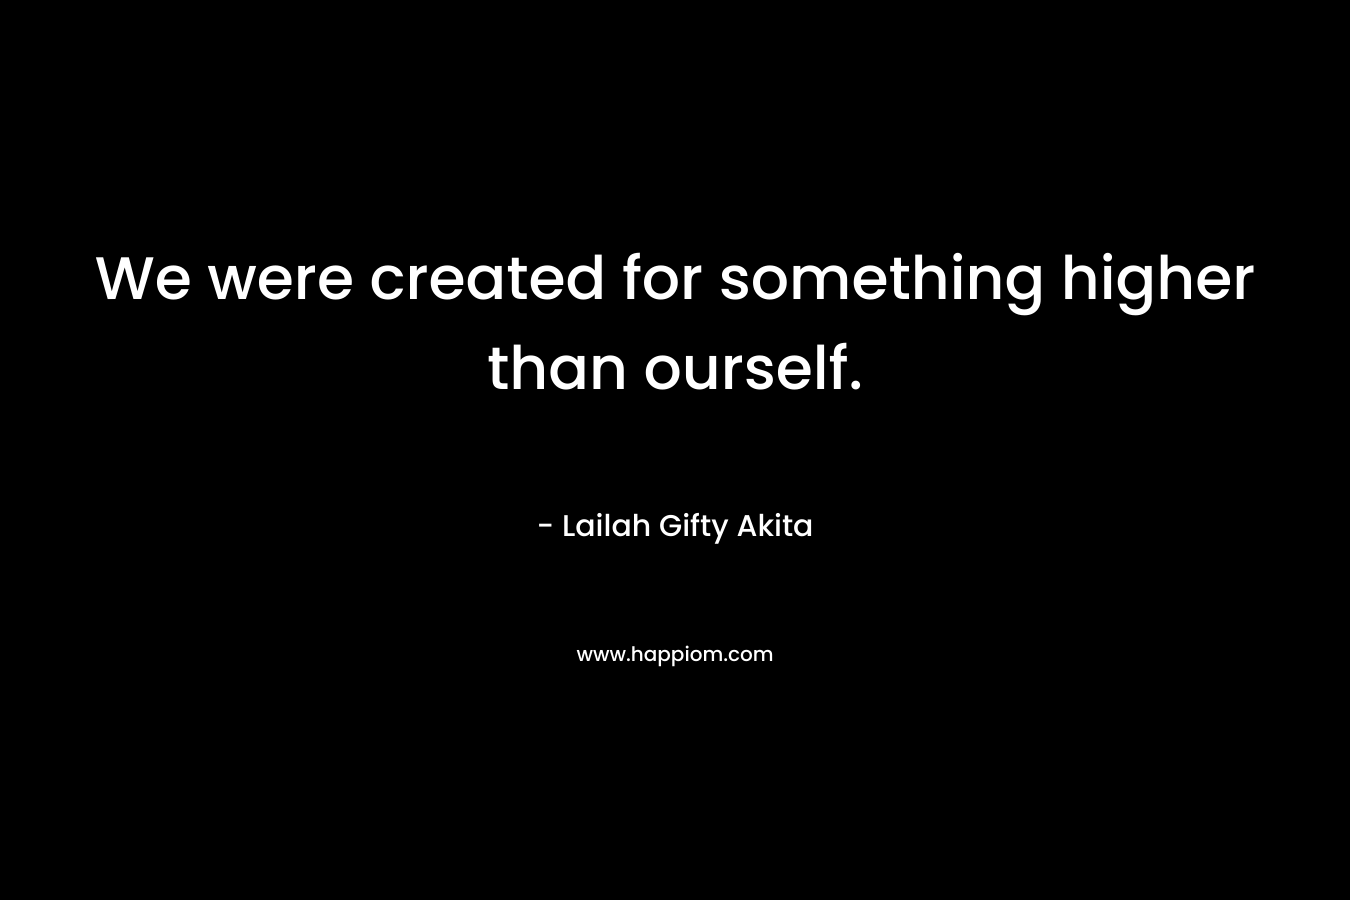 We were created for something higher than ourself. – Lailah Gifty Akita